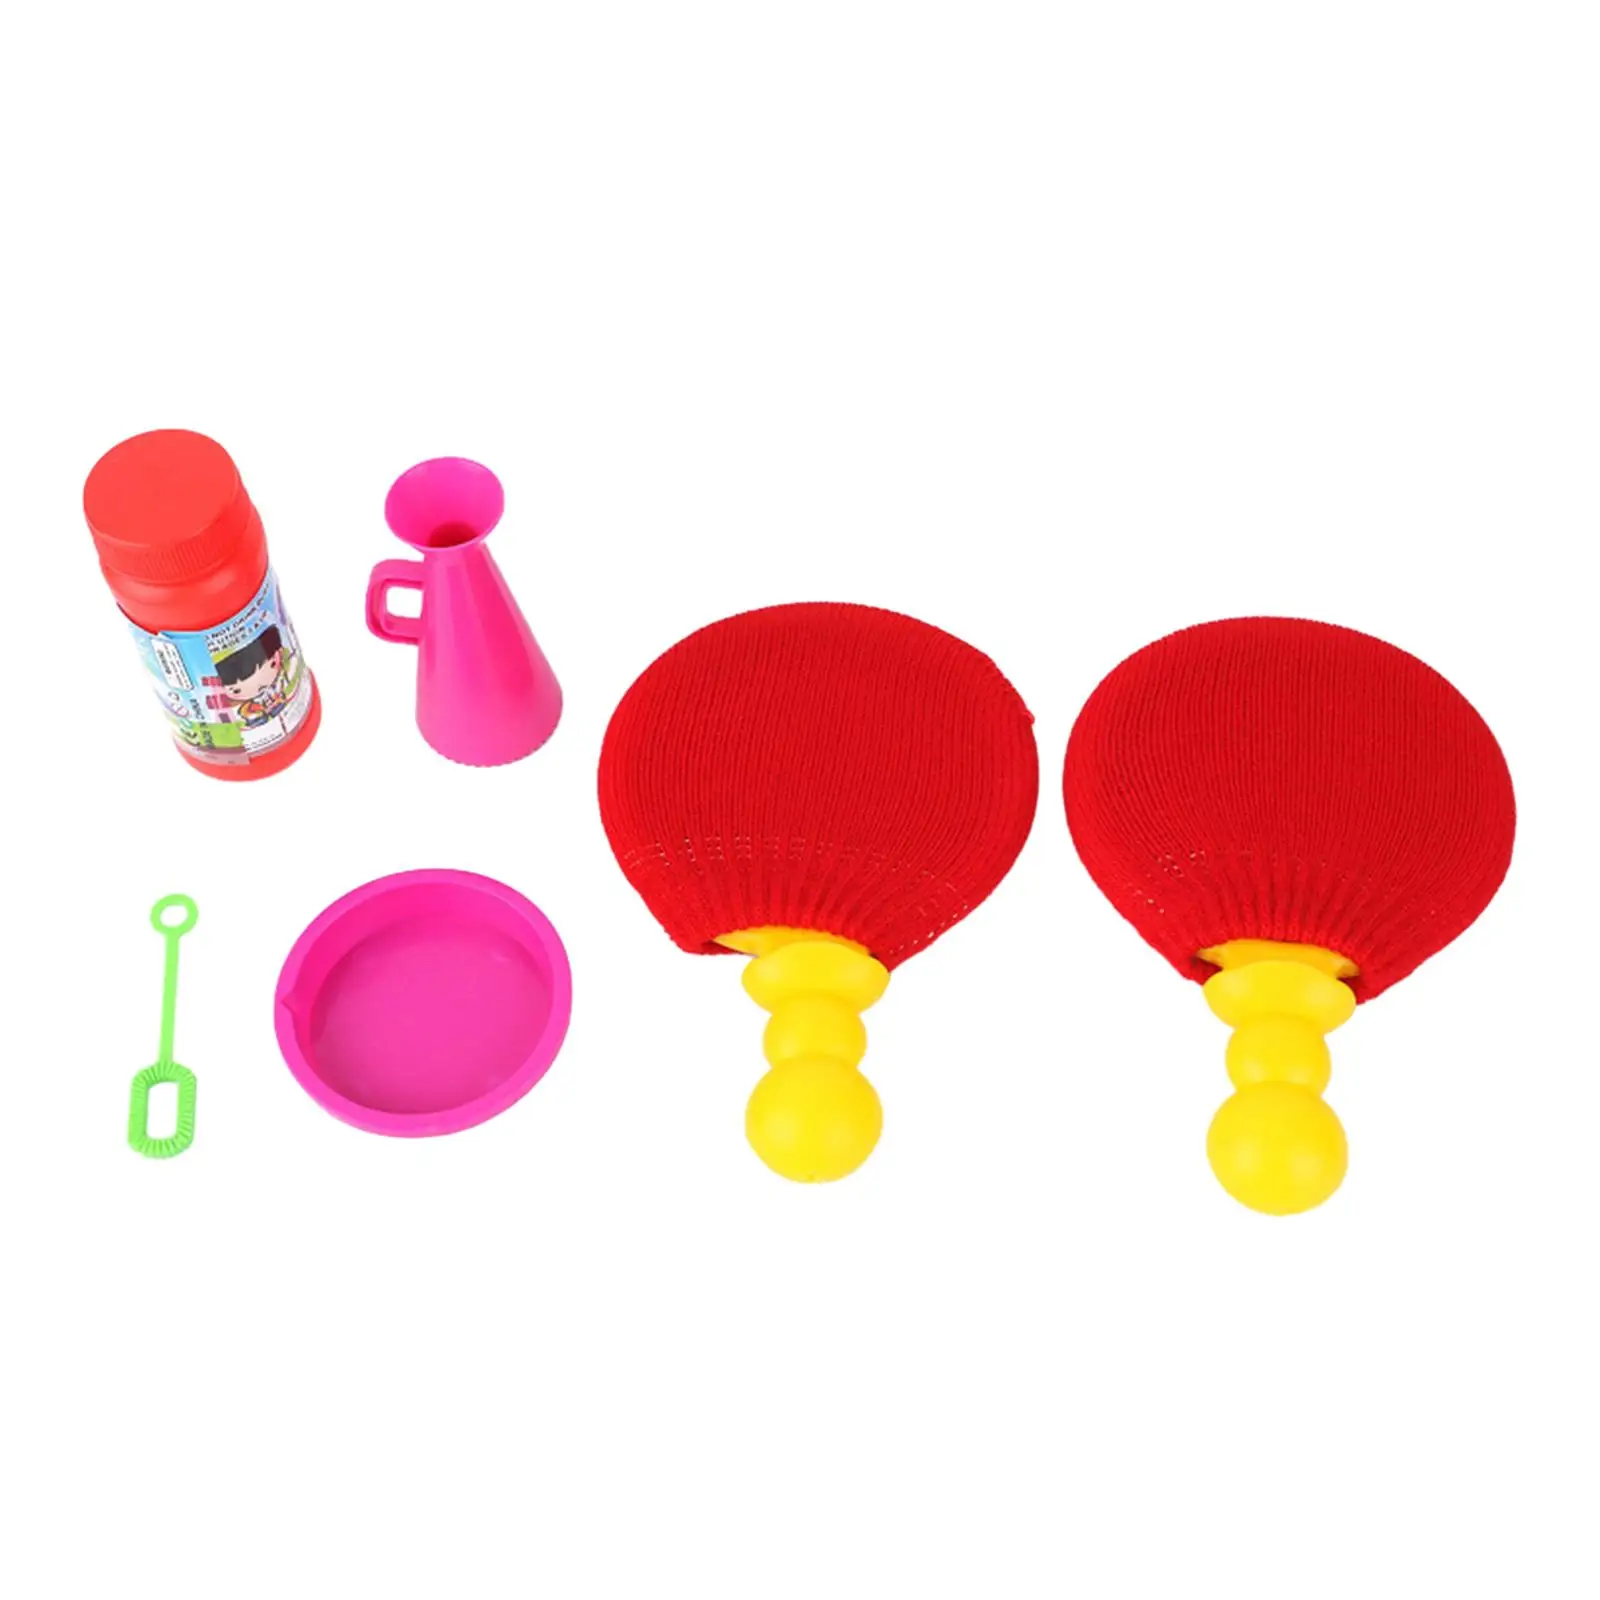 Bubble Maker Set Toys Indoor and Play Ping Pong Game with Soap Bubble for Children Toddlers Kids Girls Boys Great Gift